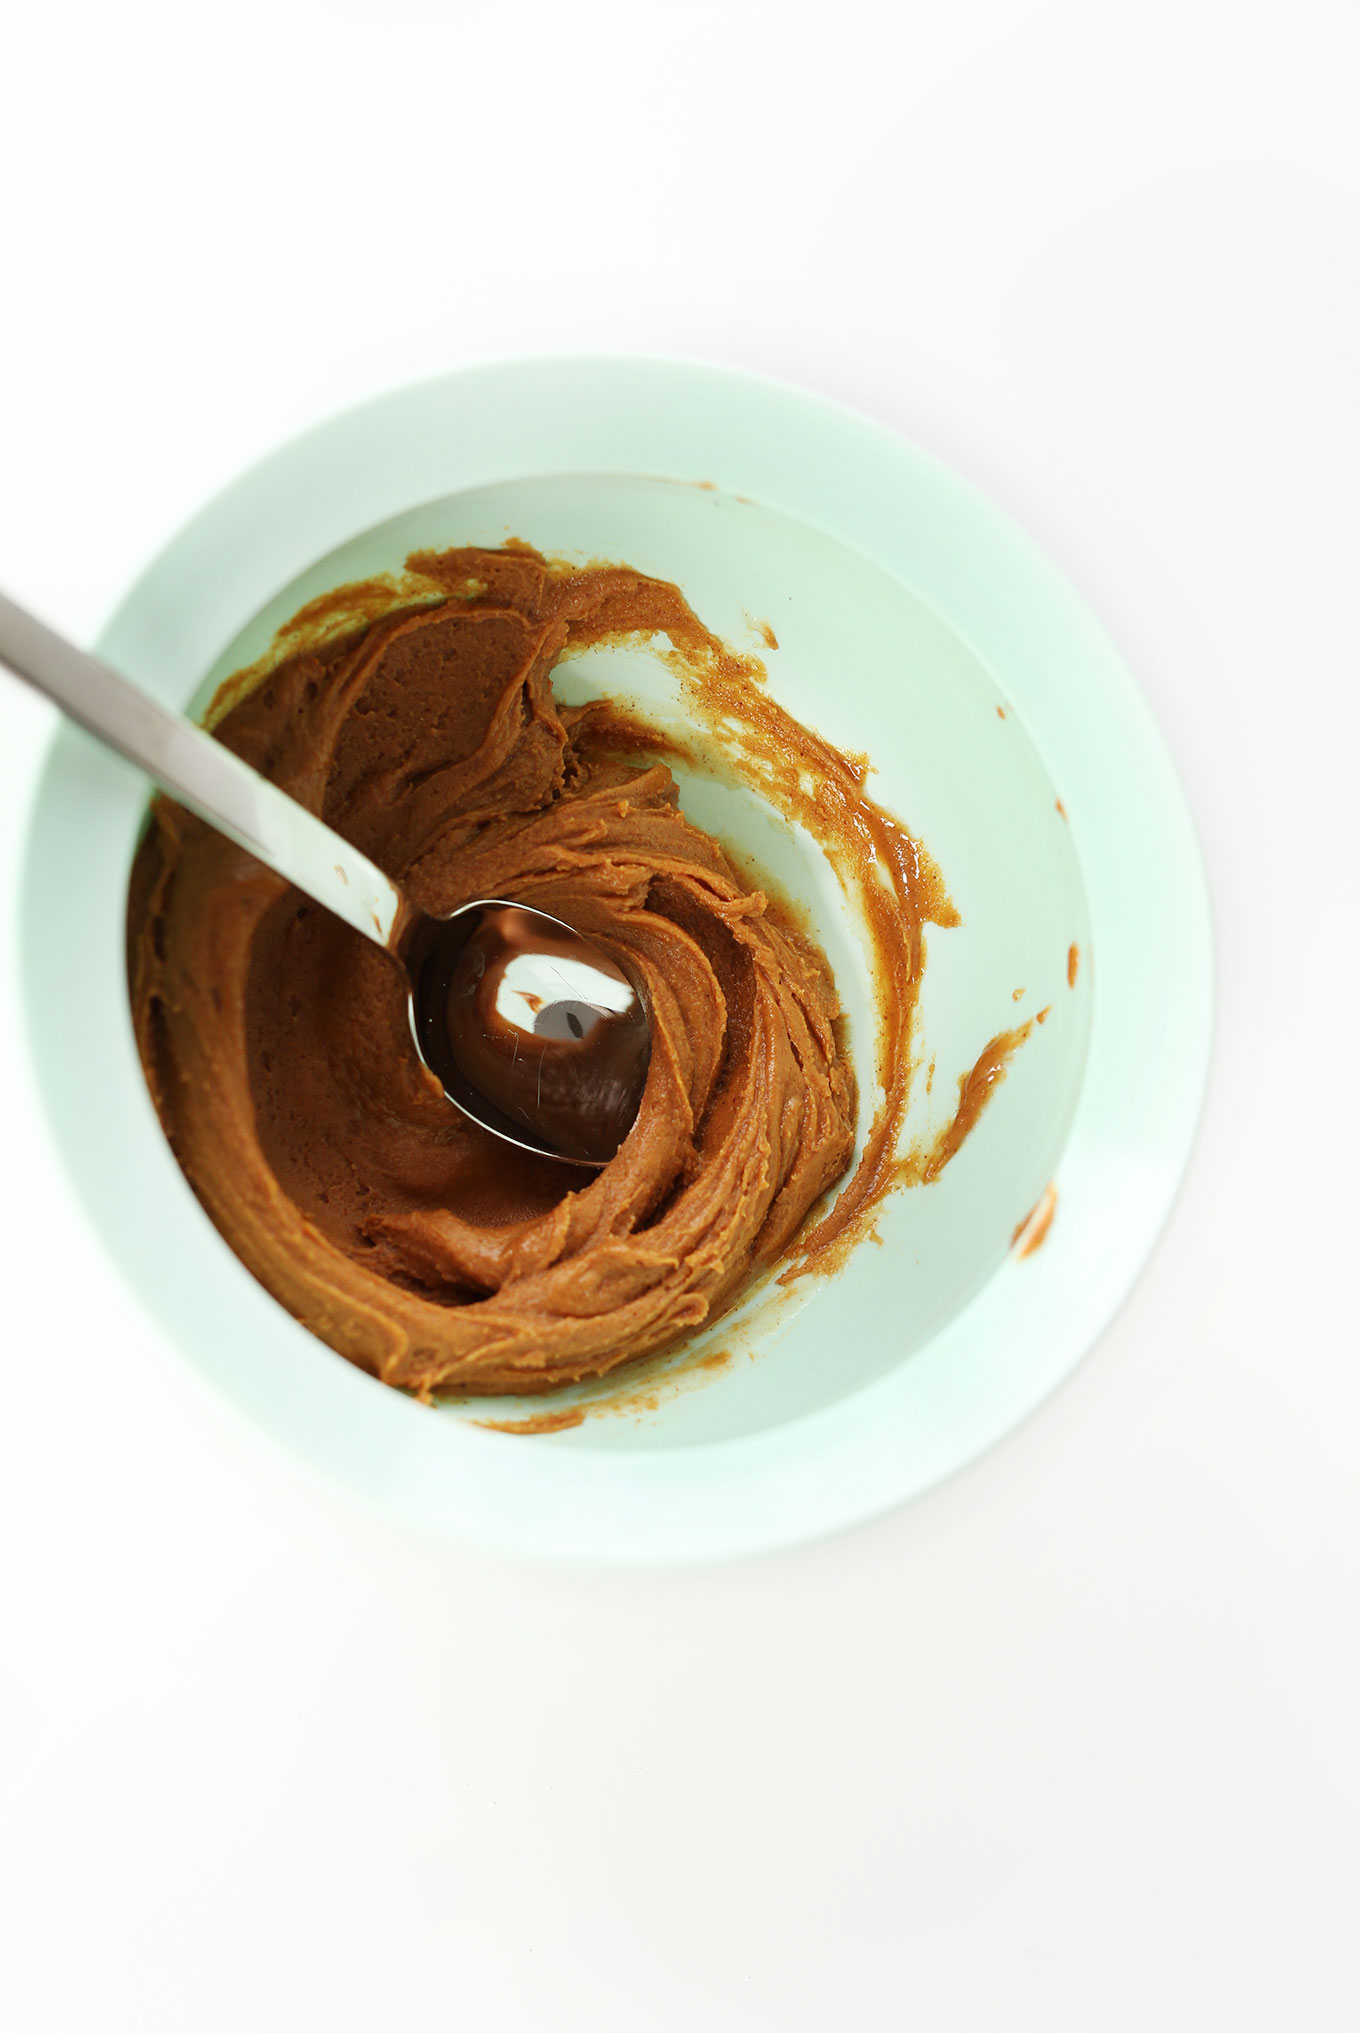 Mixing peanut butter filling for our gluten-free vegan Peanut Butter Cheese Crackers recipe